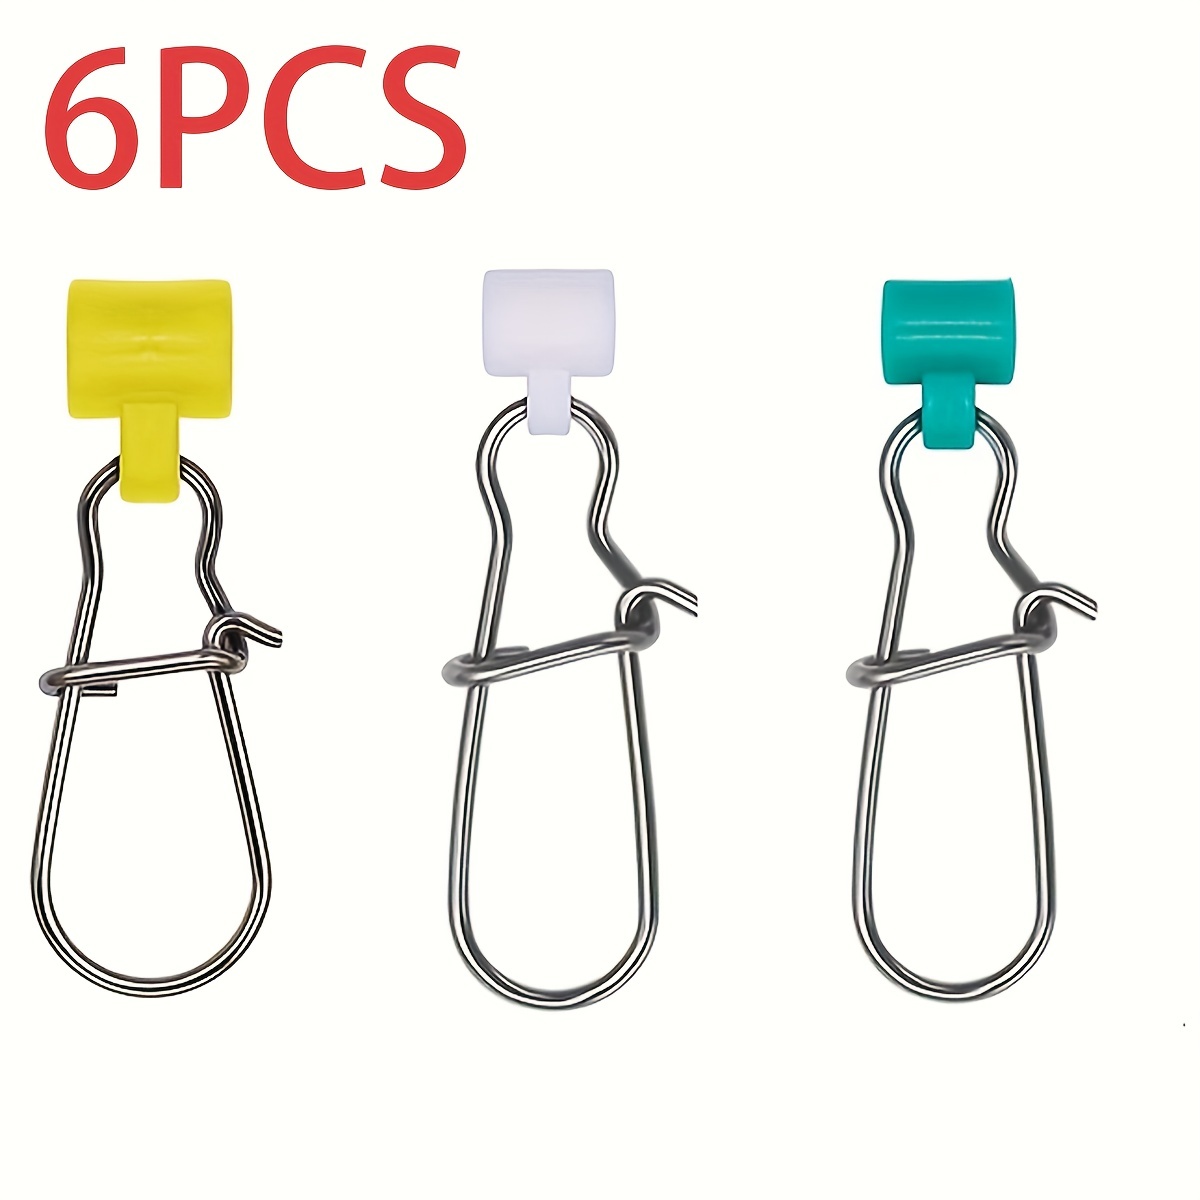 6pcs Fishing Sinker Slides, Duo Lock Snaps Connectors With Plastic Head  Reinforced Pin, Fishing Supplies Fishing Tackle Accessories